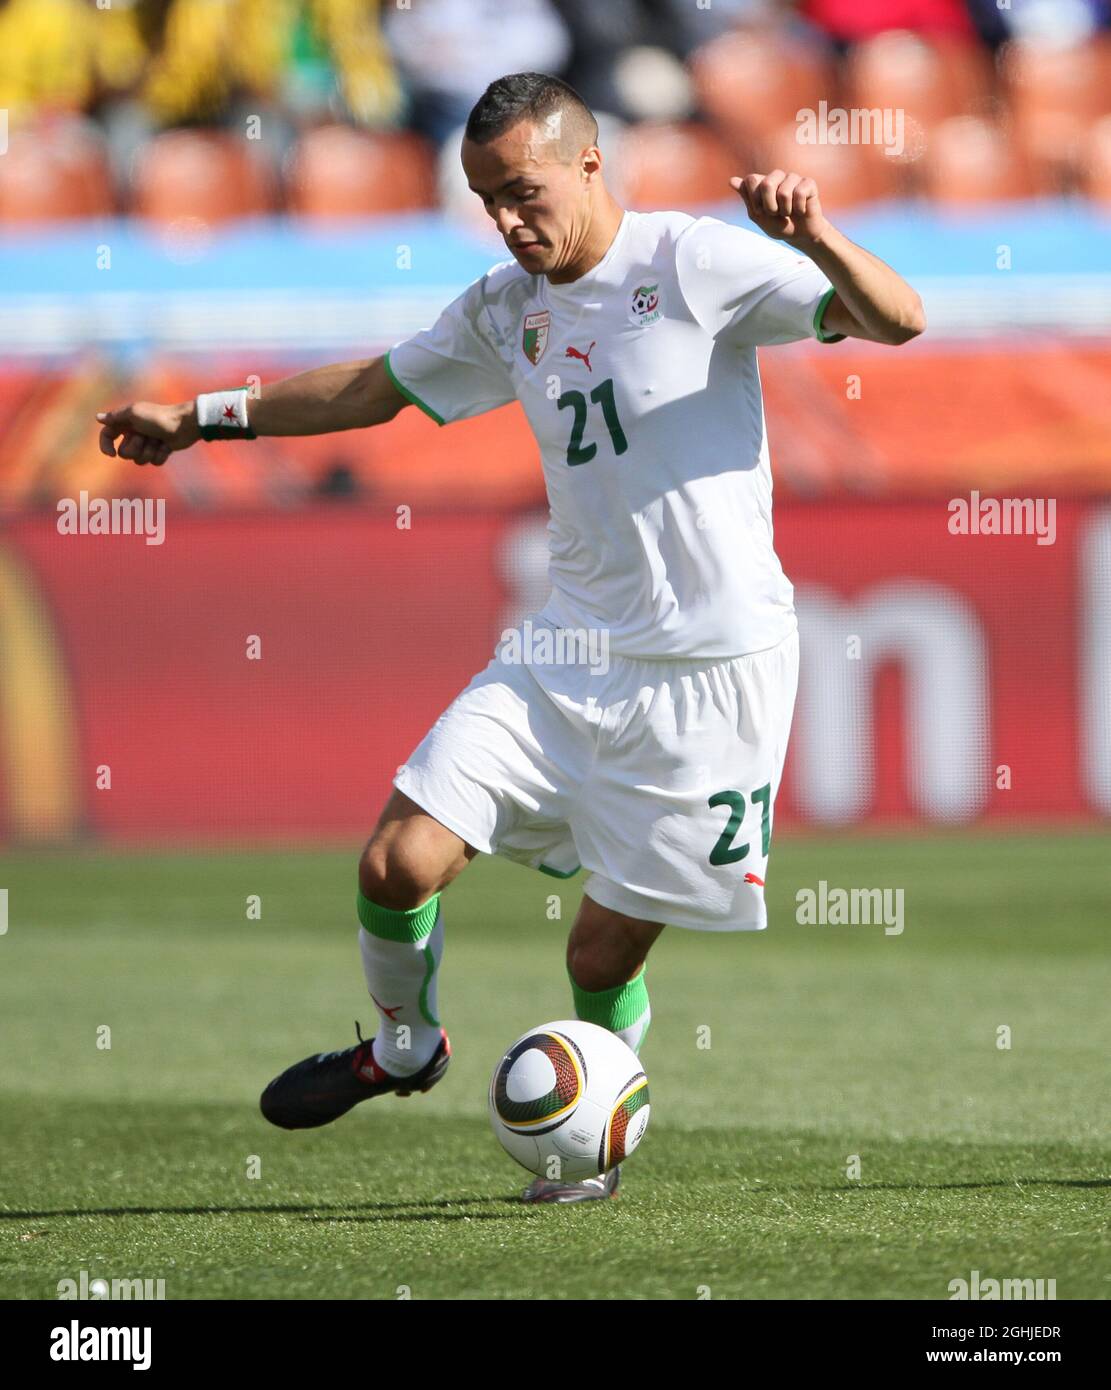 Algeria's Foued Kadir in action during the FIFA World Cup 2010 Group C match between Algeria and Slovenia at Peter Mokaba Stadium in South Africa. Stock Photo